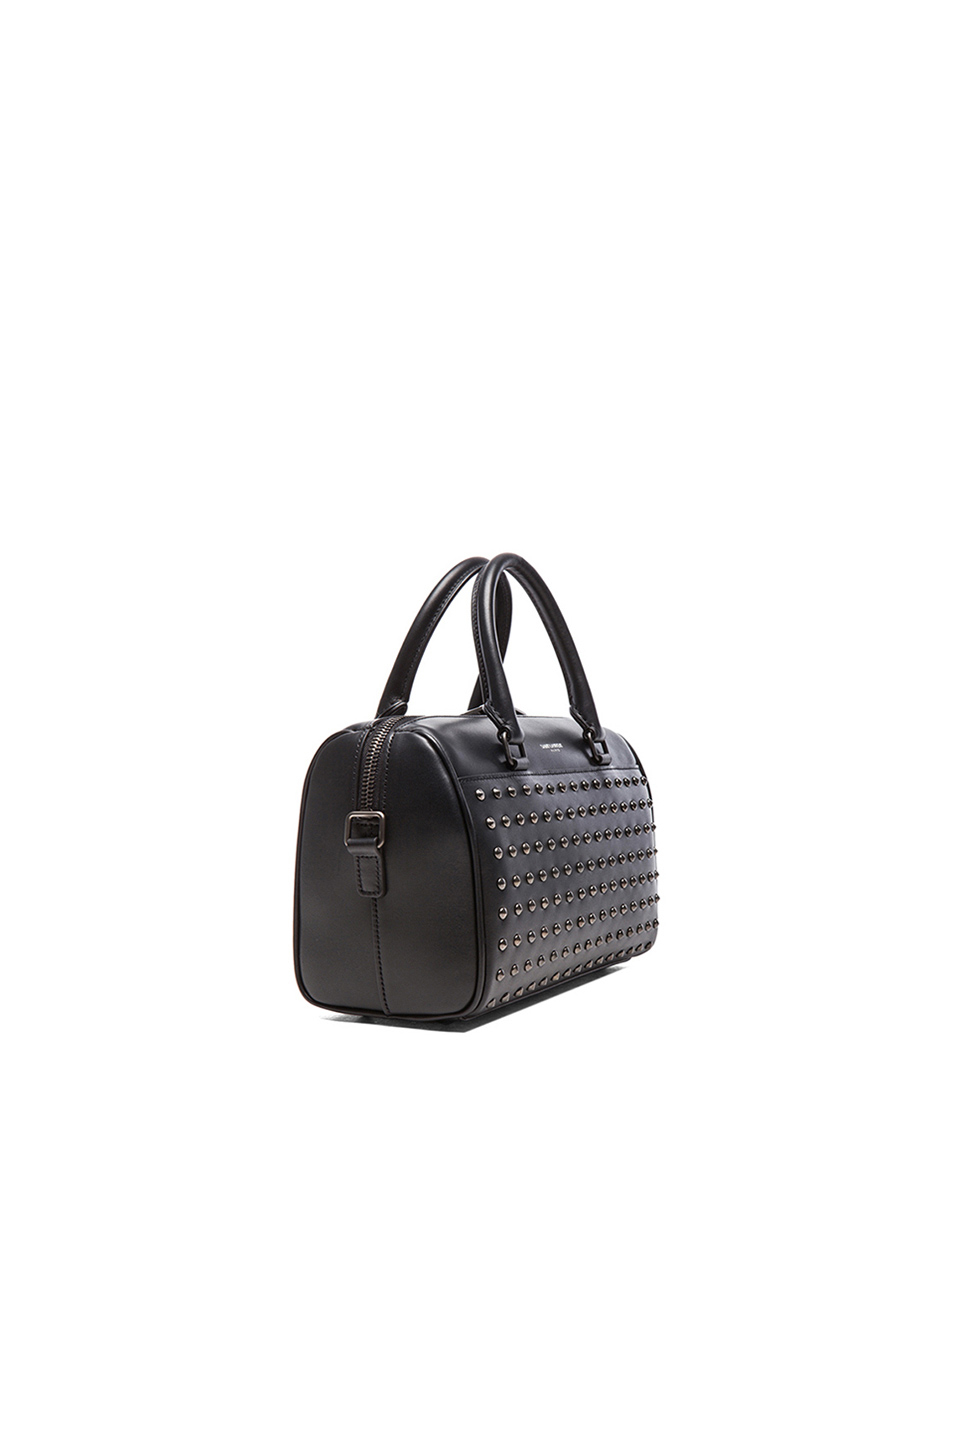 Saint Laurent Leather Studded Baby Duffle Bag in Black - Lyst